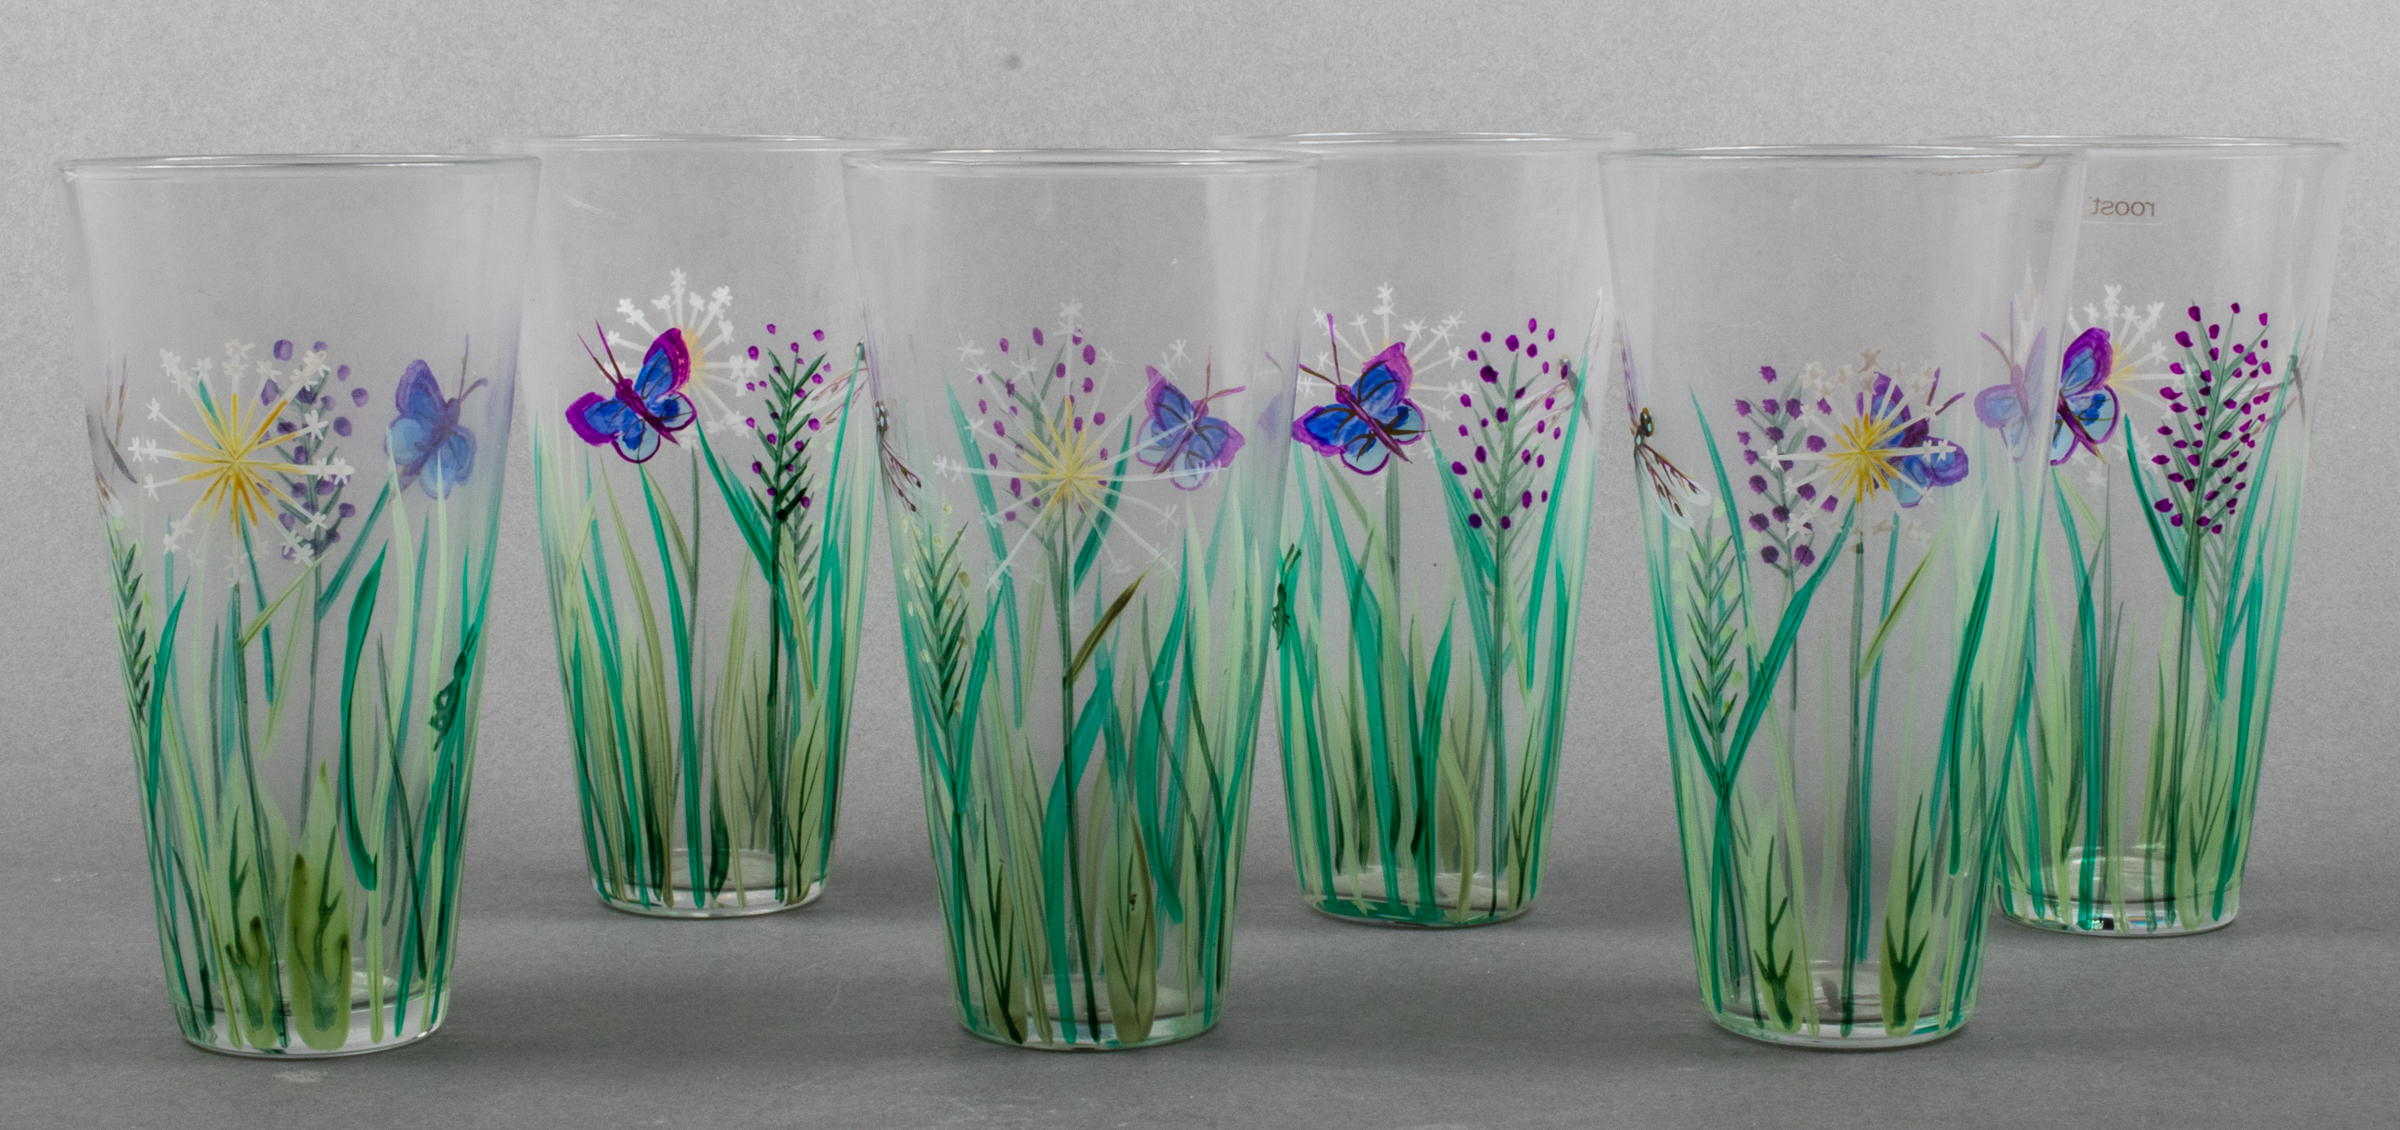 ROOST HAND PAINTED GLASSES 6 A 3c3666